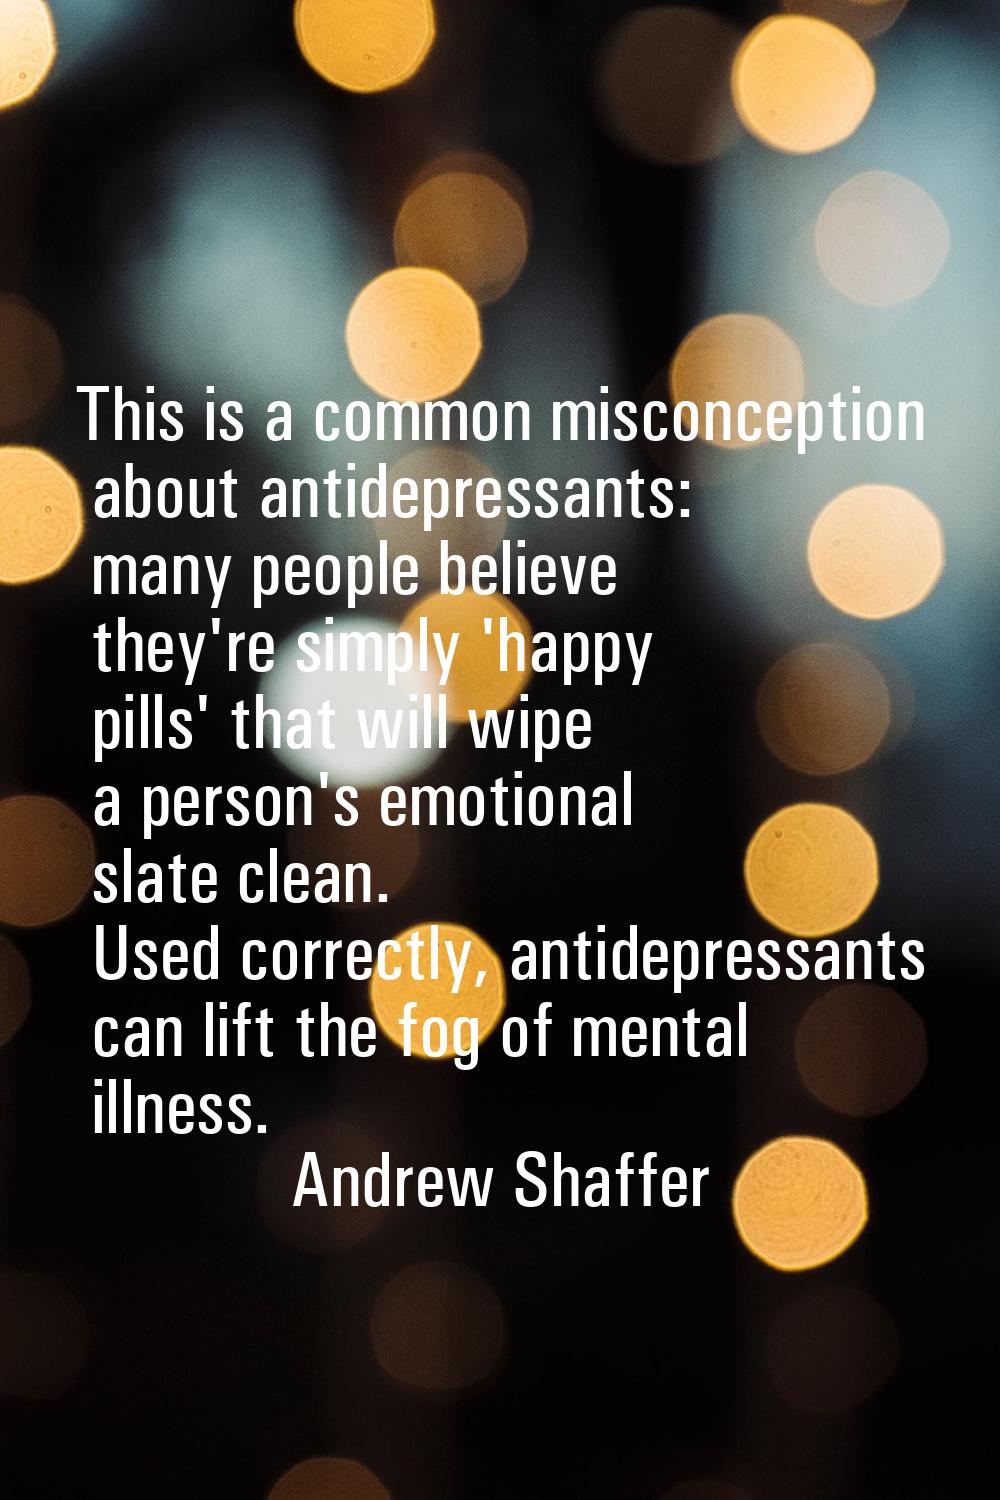 This is a common misconception about antidepressants: many people believe they're simply 'happy pil